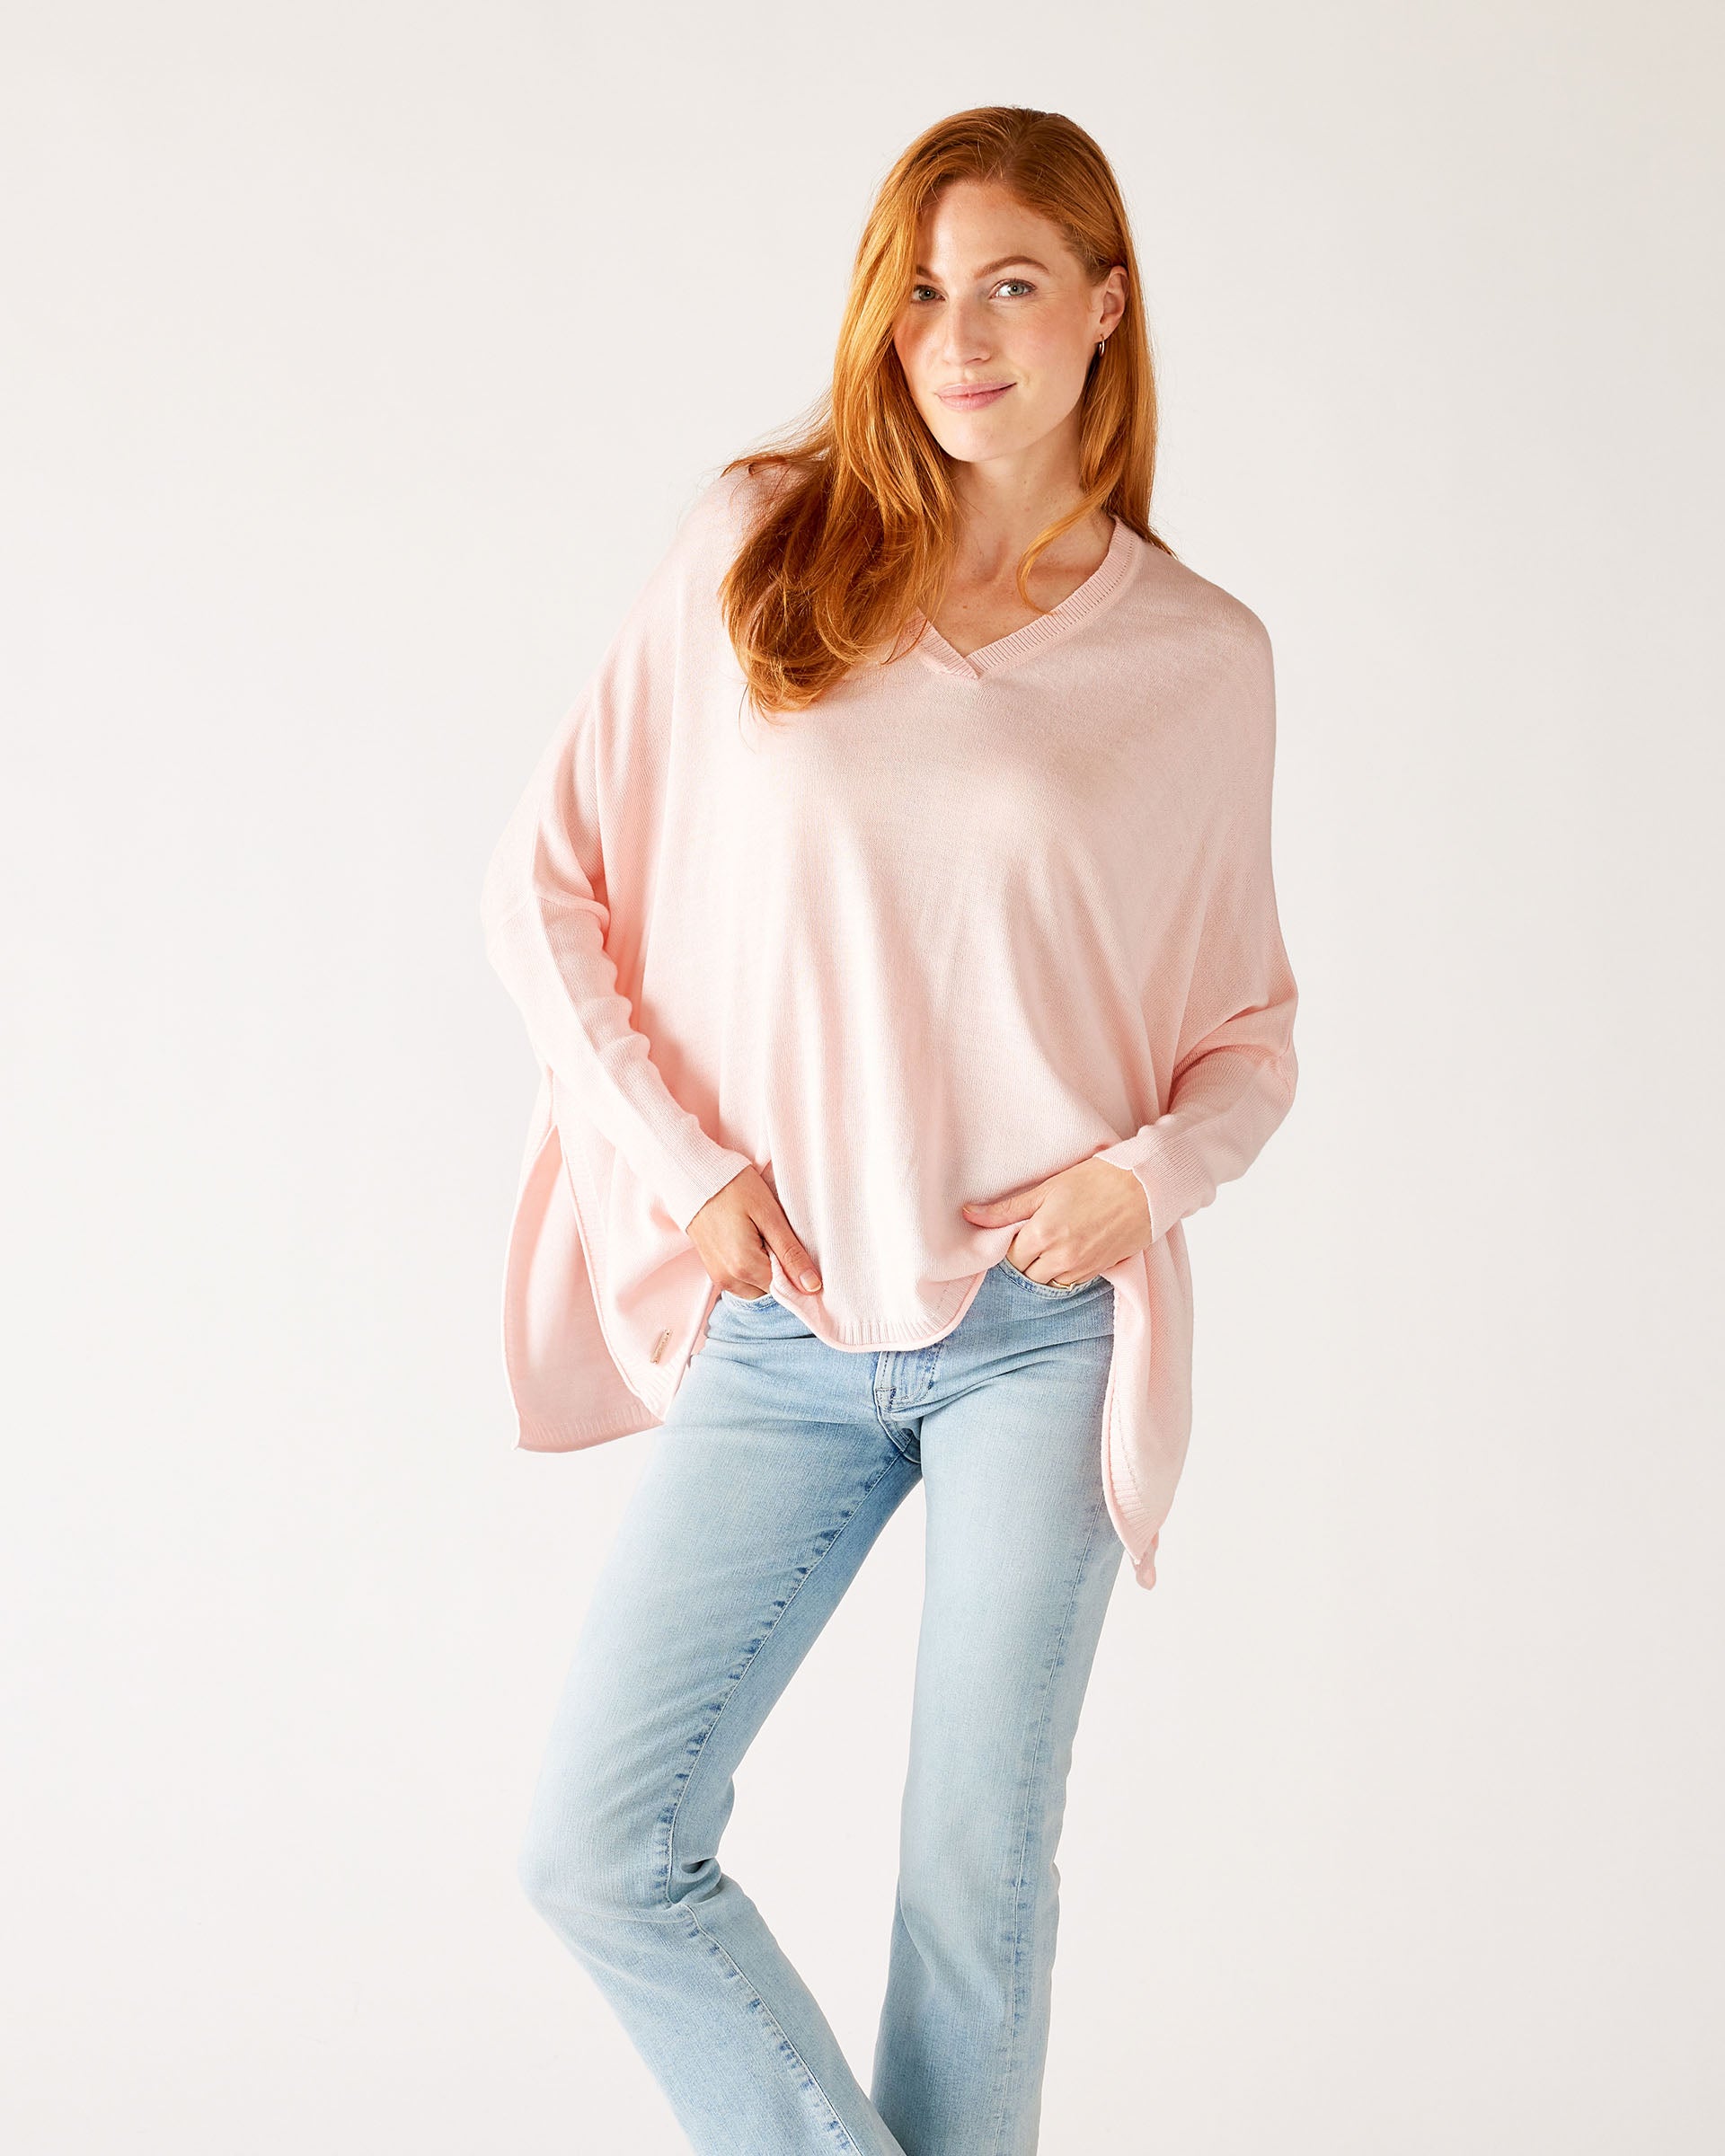 Women's One Size Vneck Knit Sweater in Light Pink Chest View